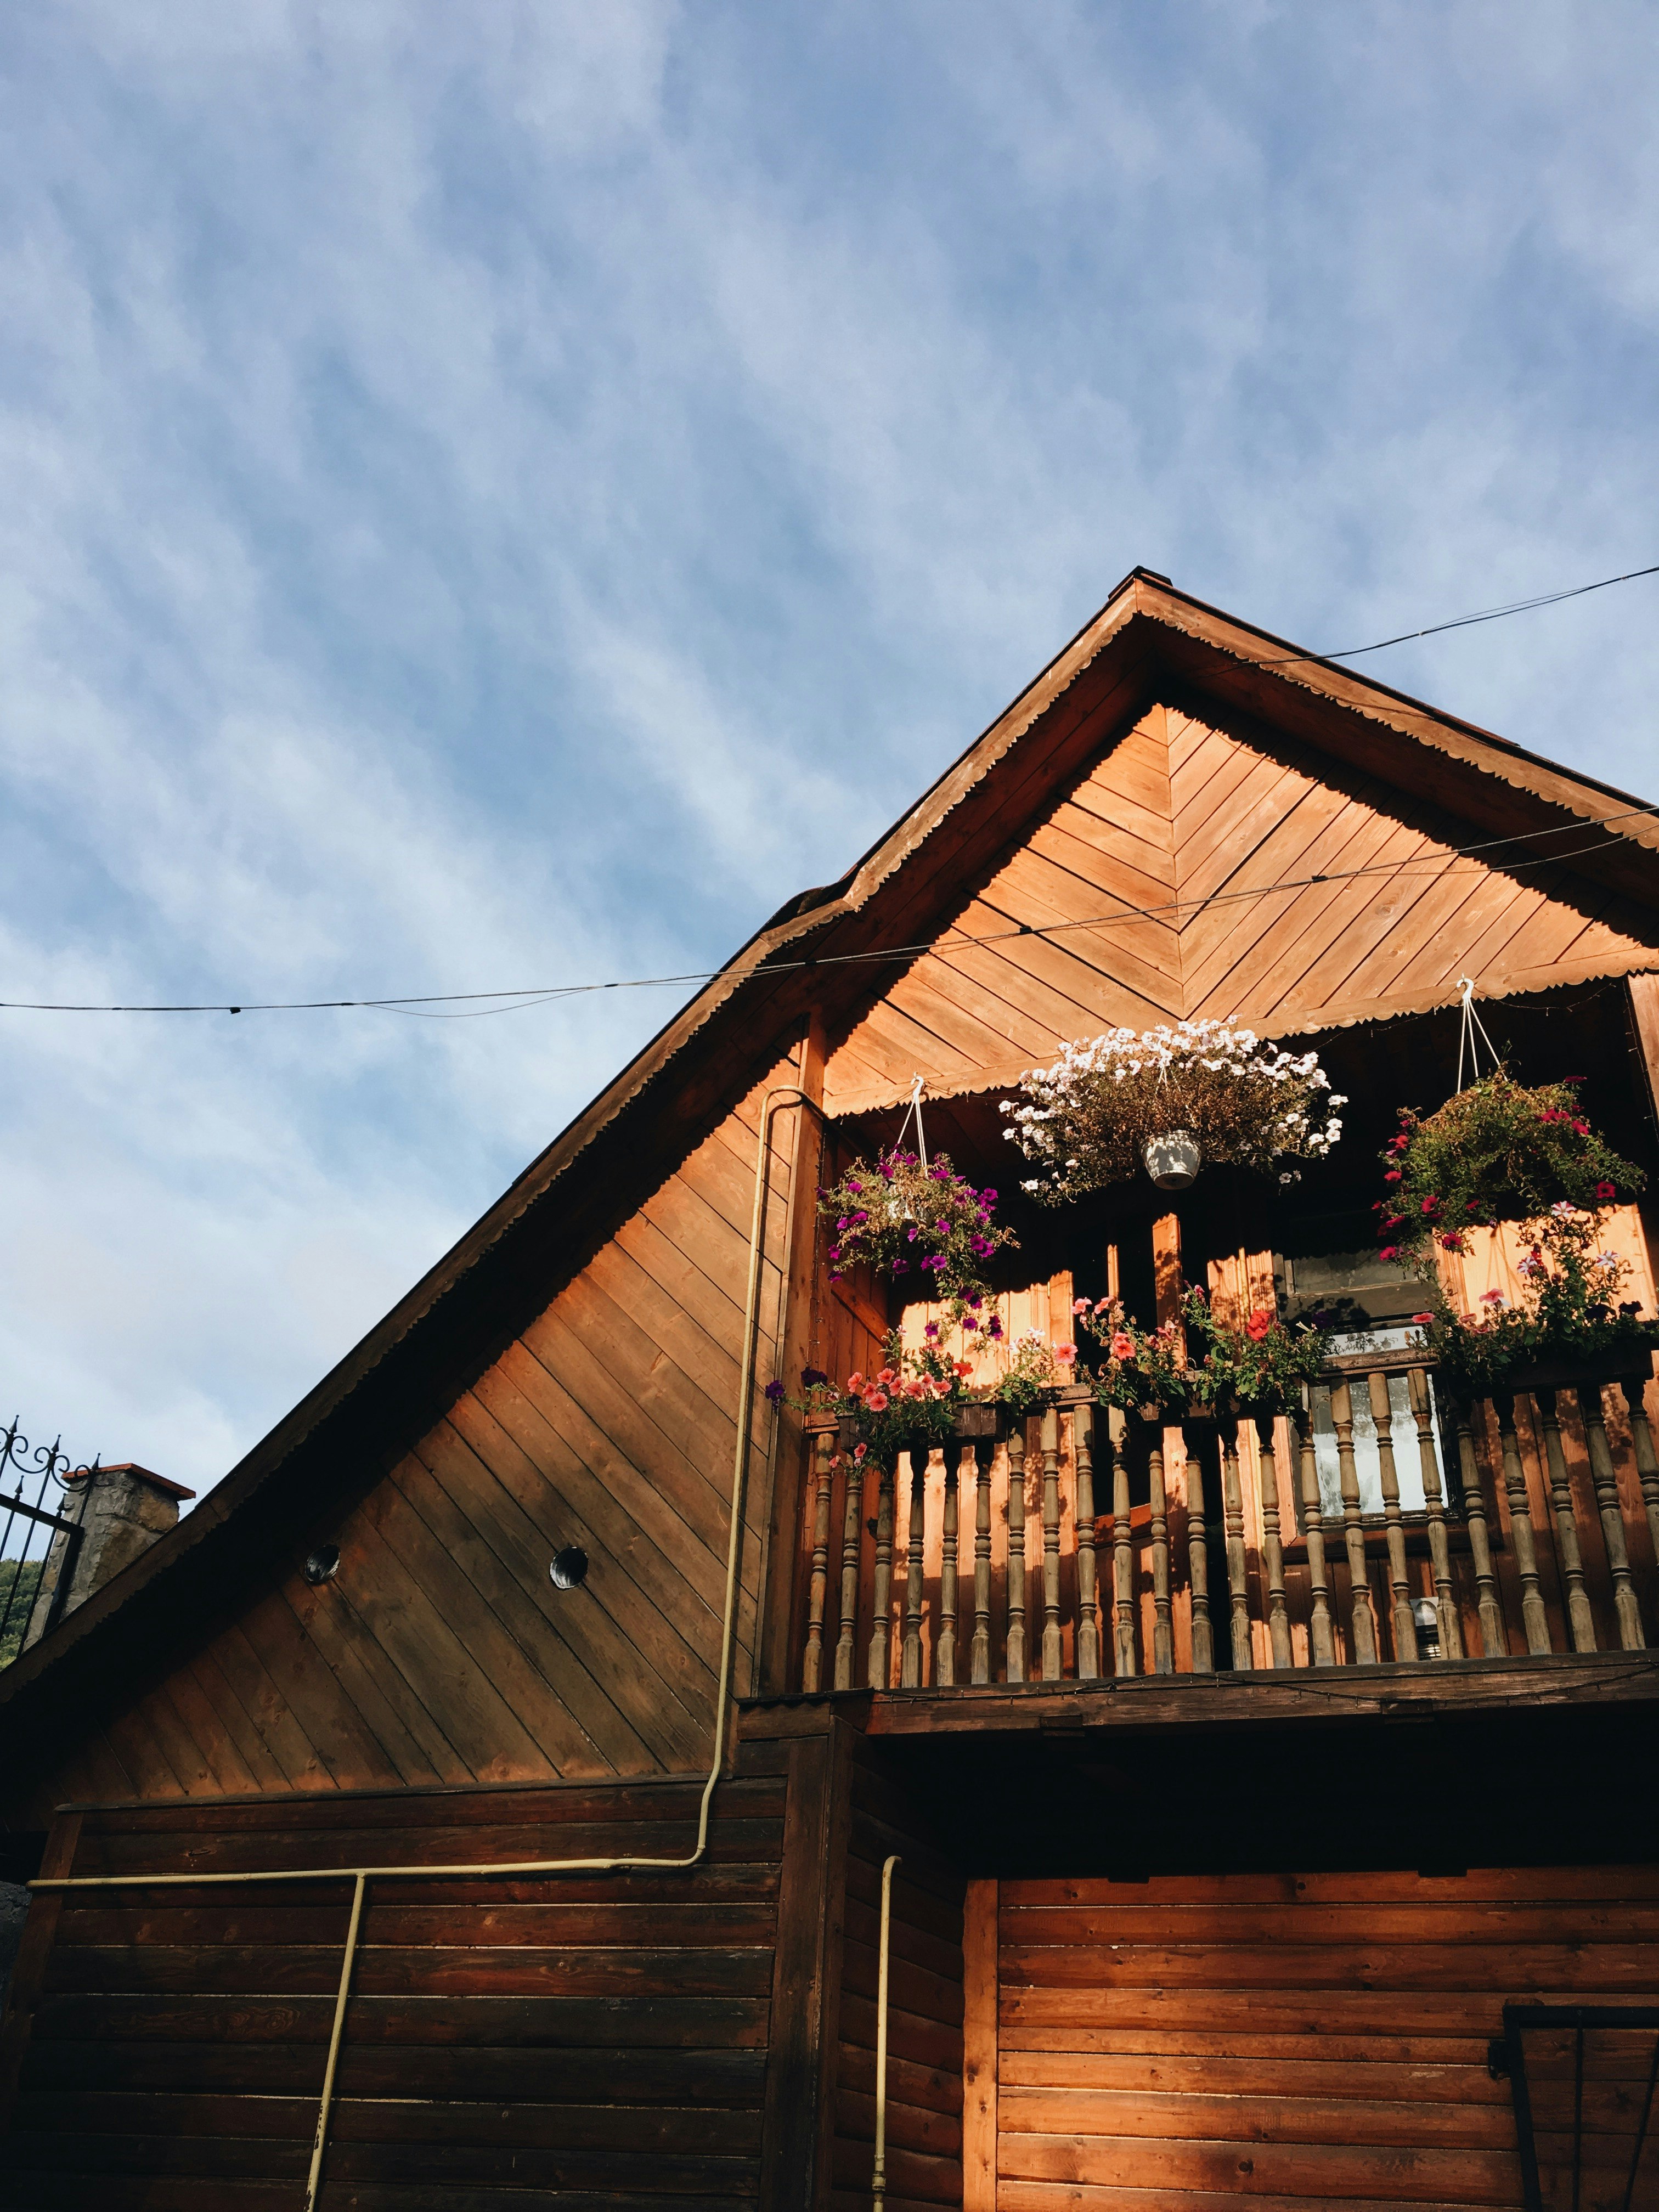 brown wooden house with flowers on top under white clouds during daytime